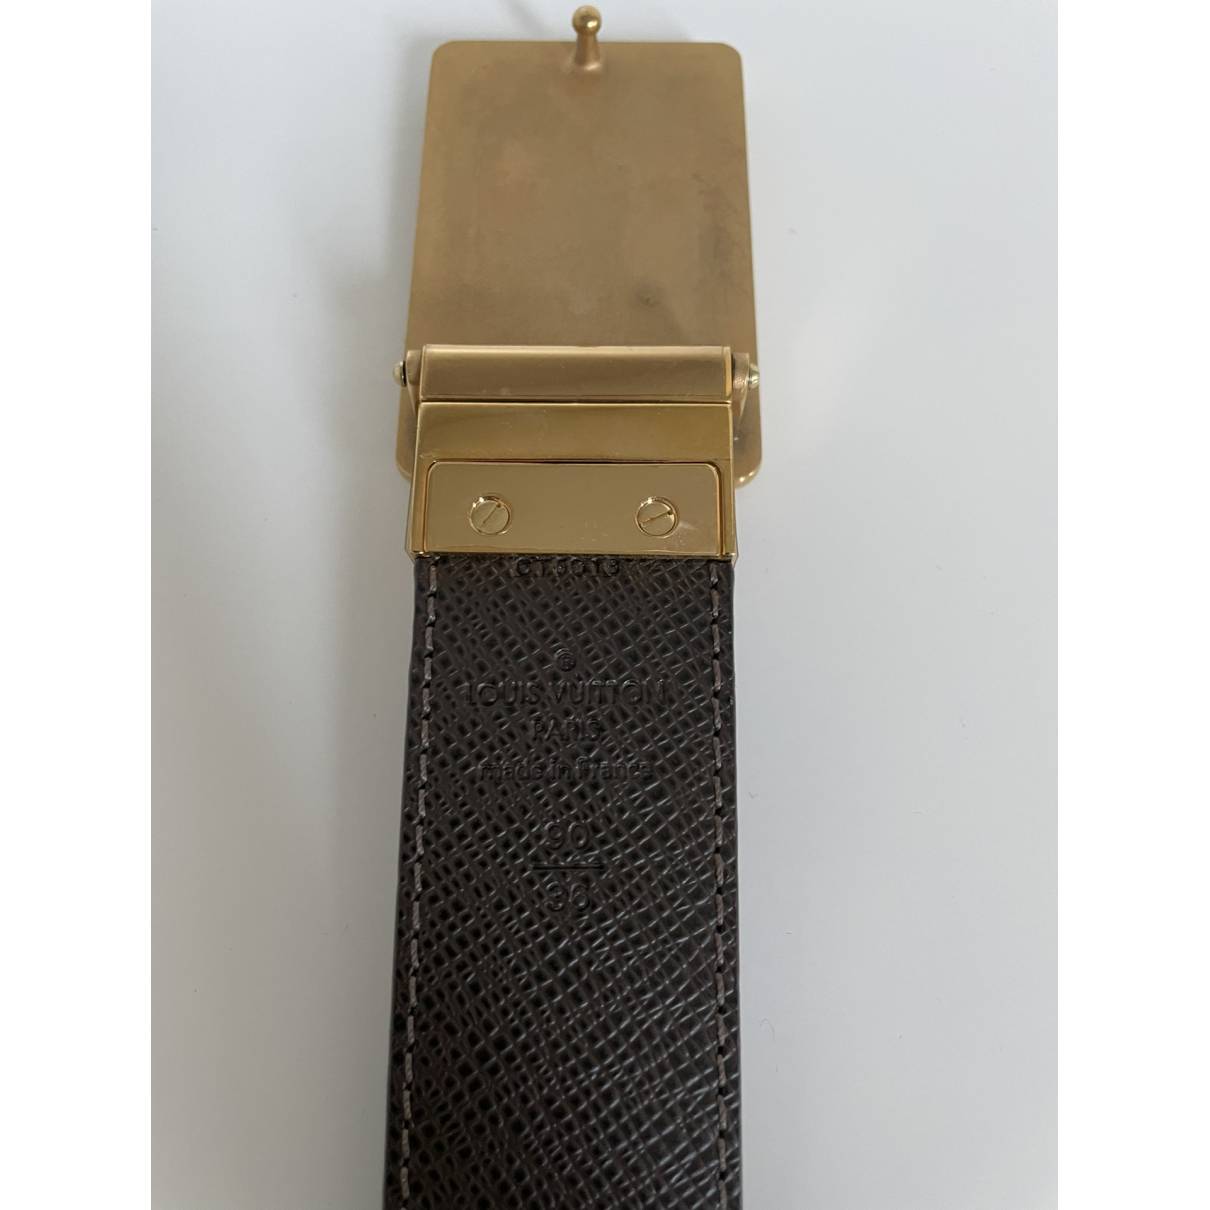 Louis Vuitton - Authenticated Belt - Metal Brown for Men, Very Good Condition